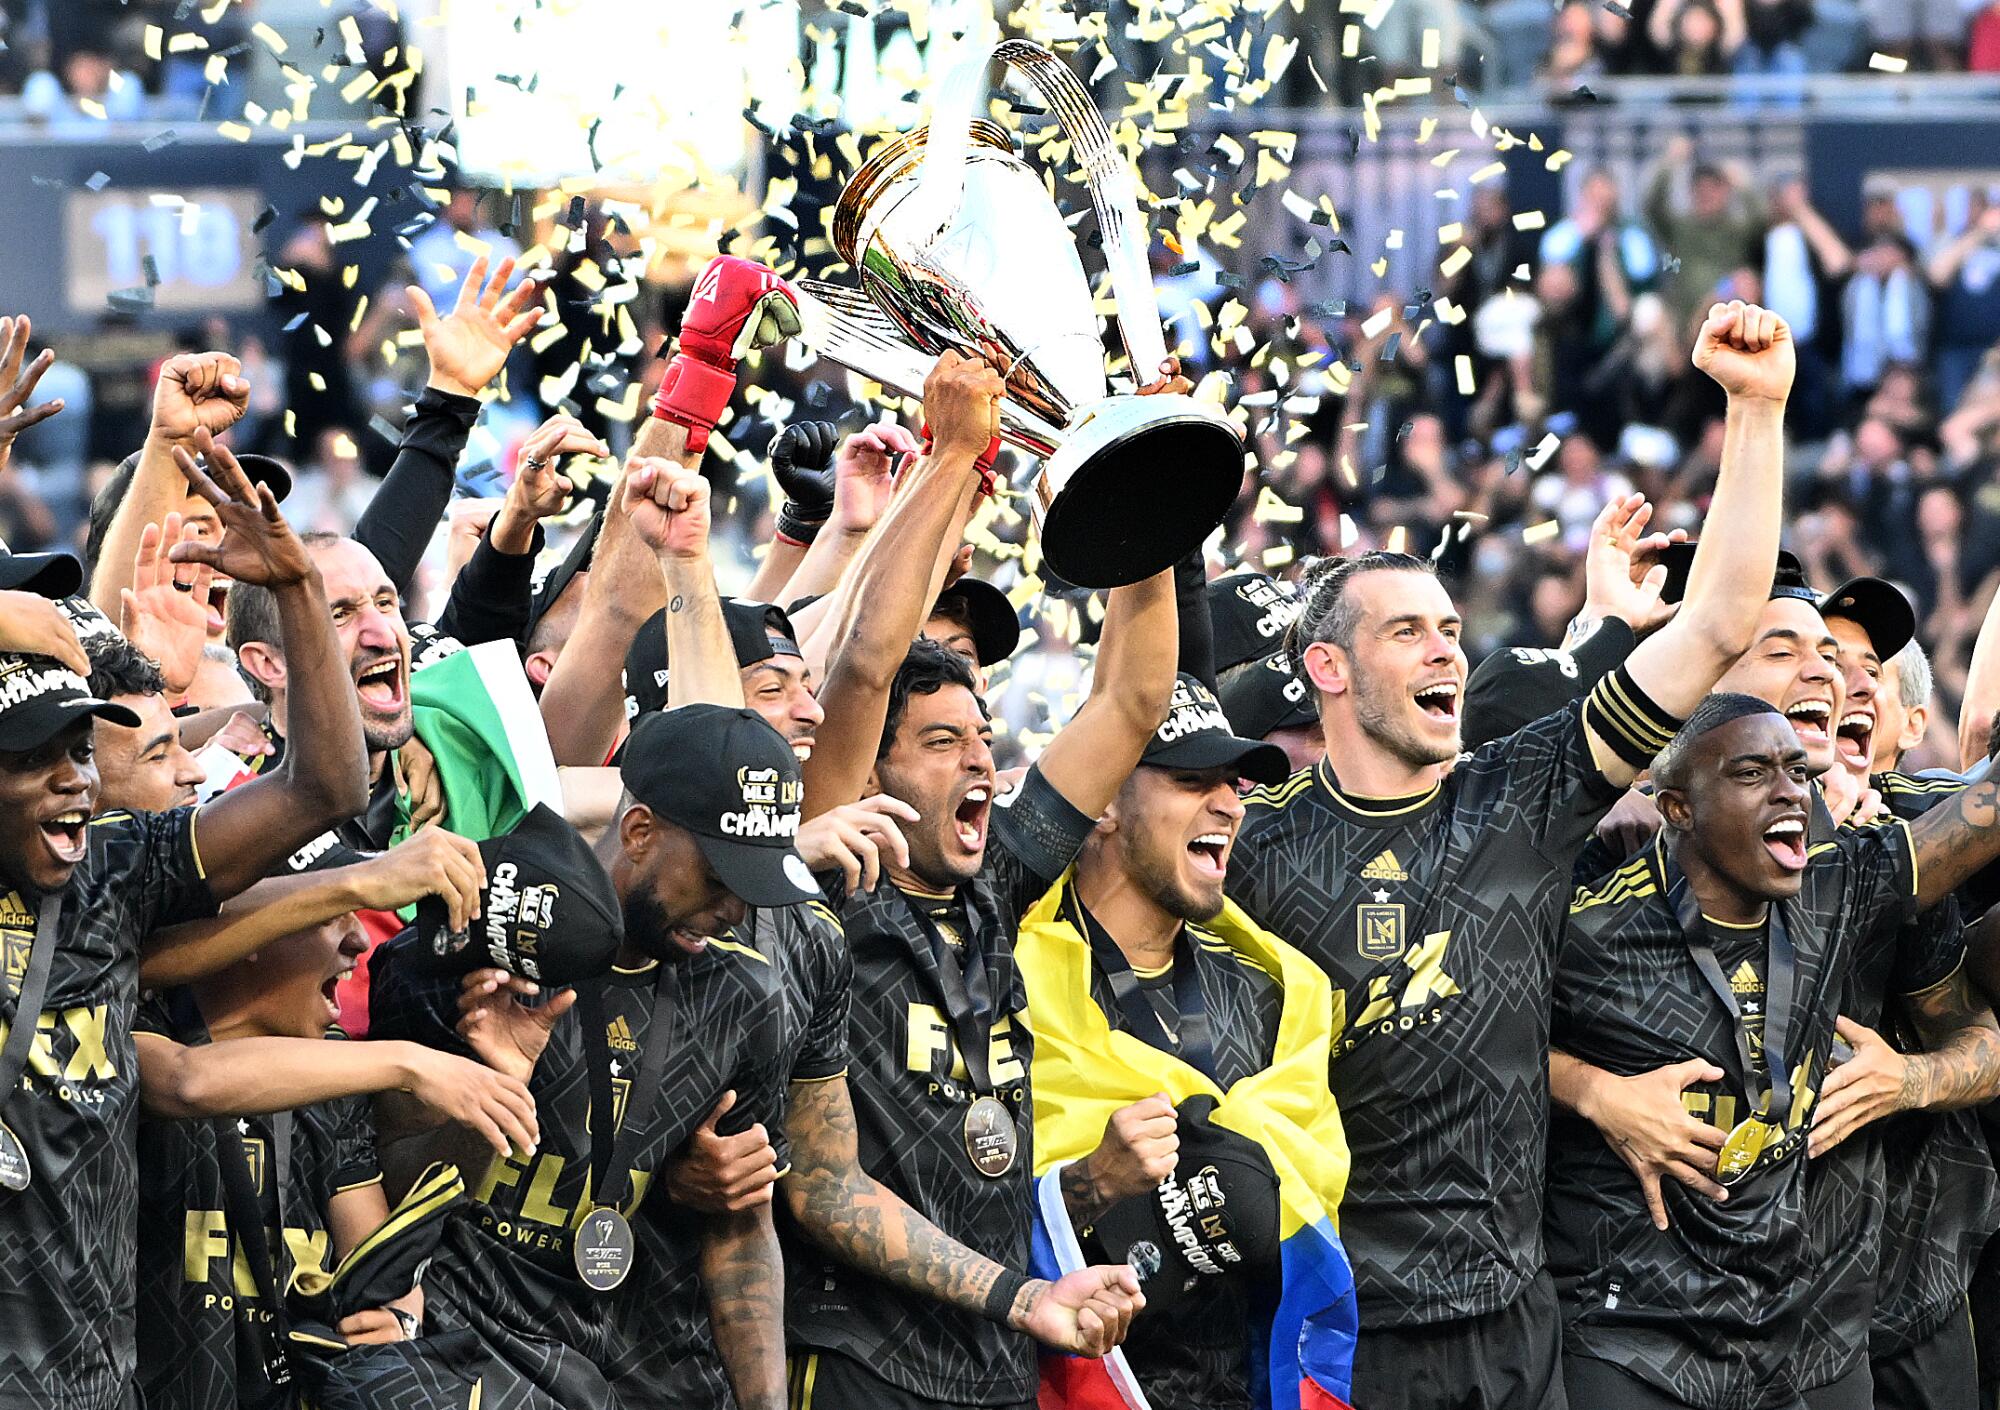 LAFC players celebrate after winning the MLS Cup, holding up the trophy